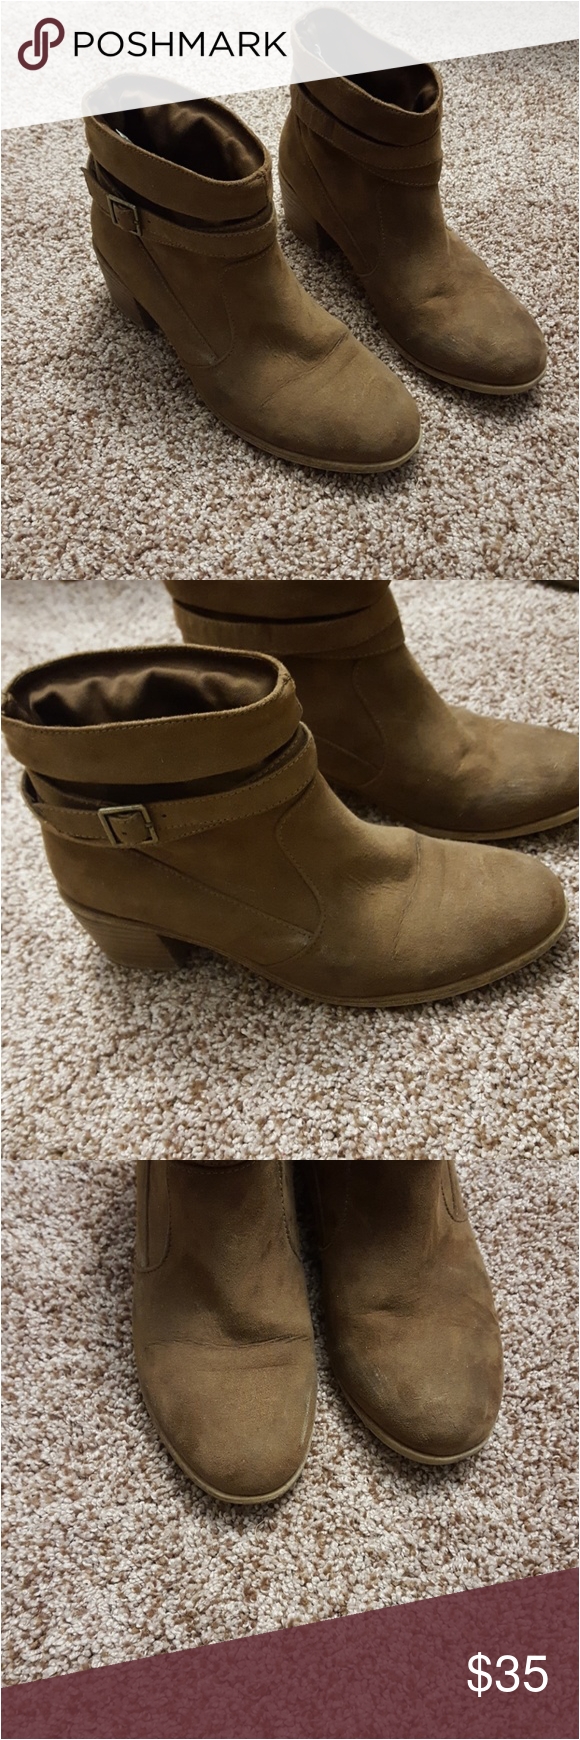 american eagle brown booties booties with 1 5 inch heel and cute buckle to add flair light wear gently used can be worn all night amd still be